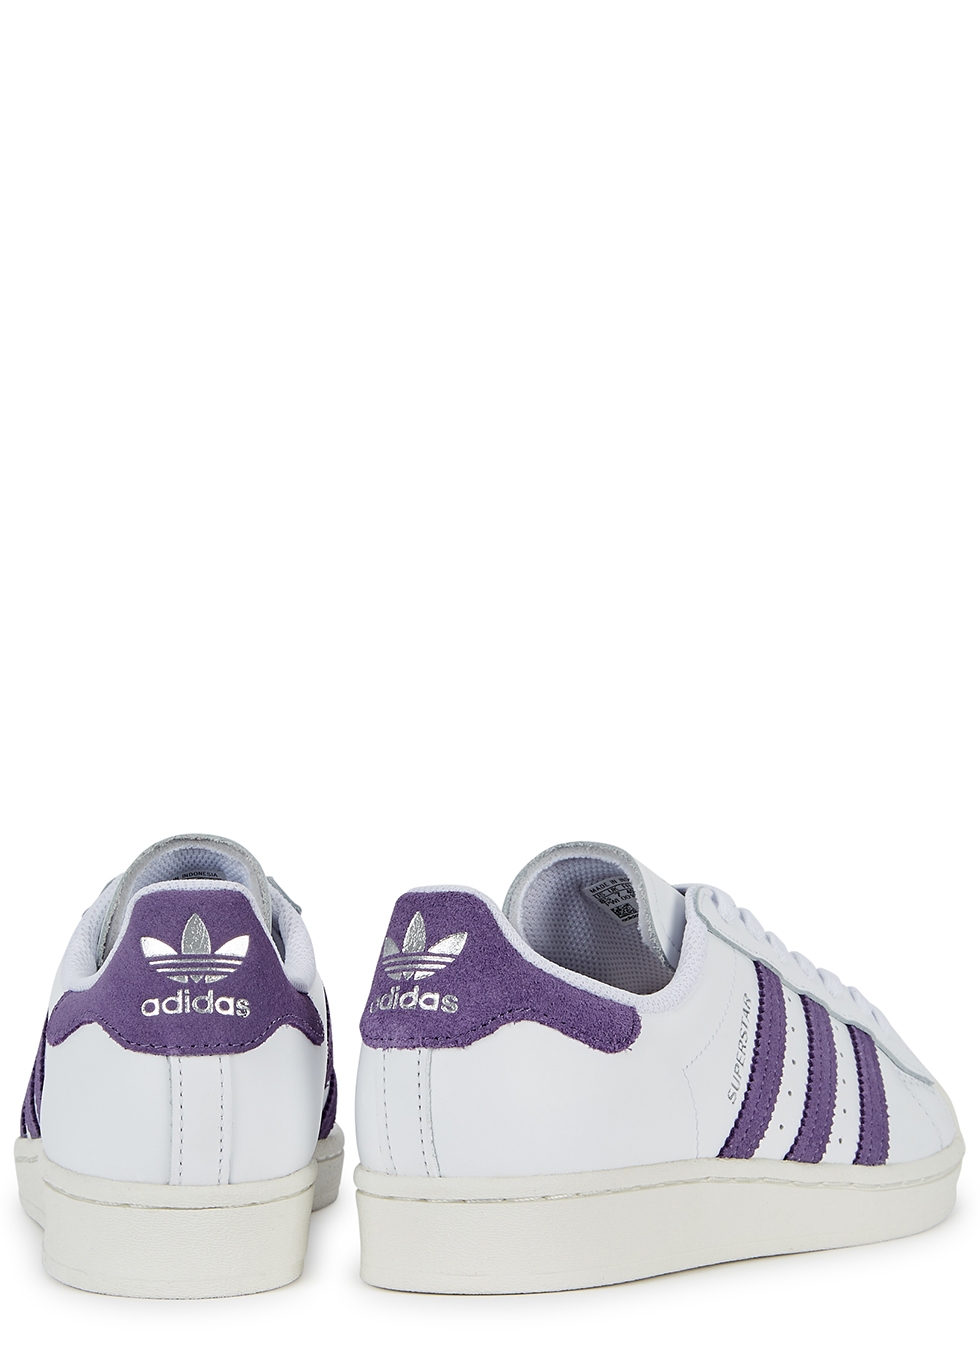 white leather shoes adidas